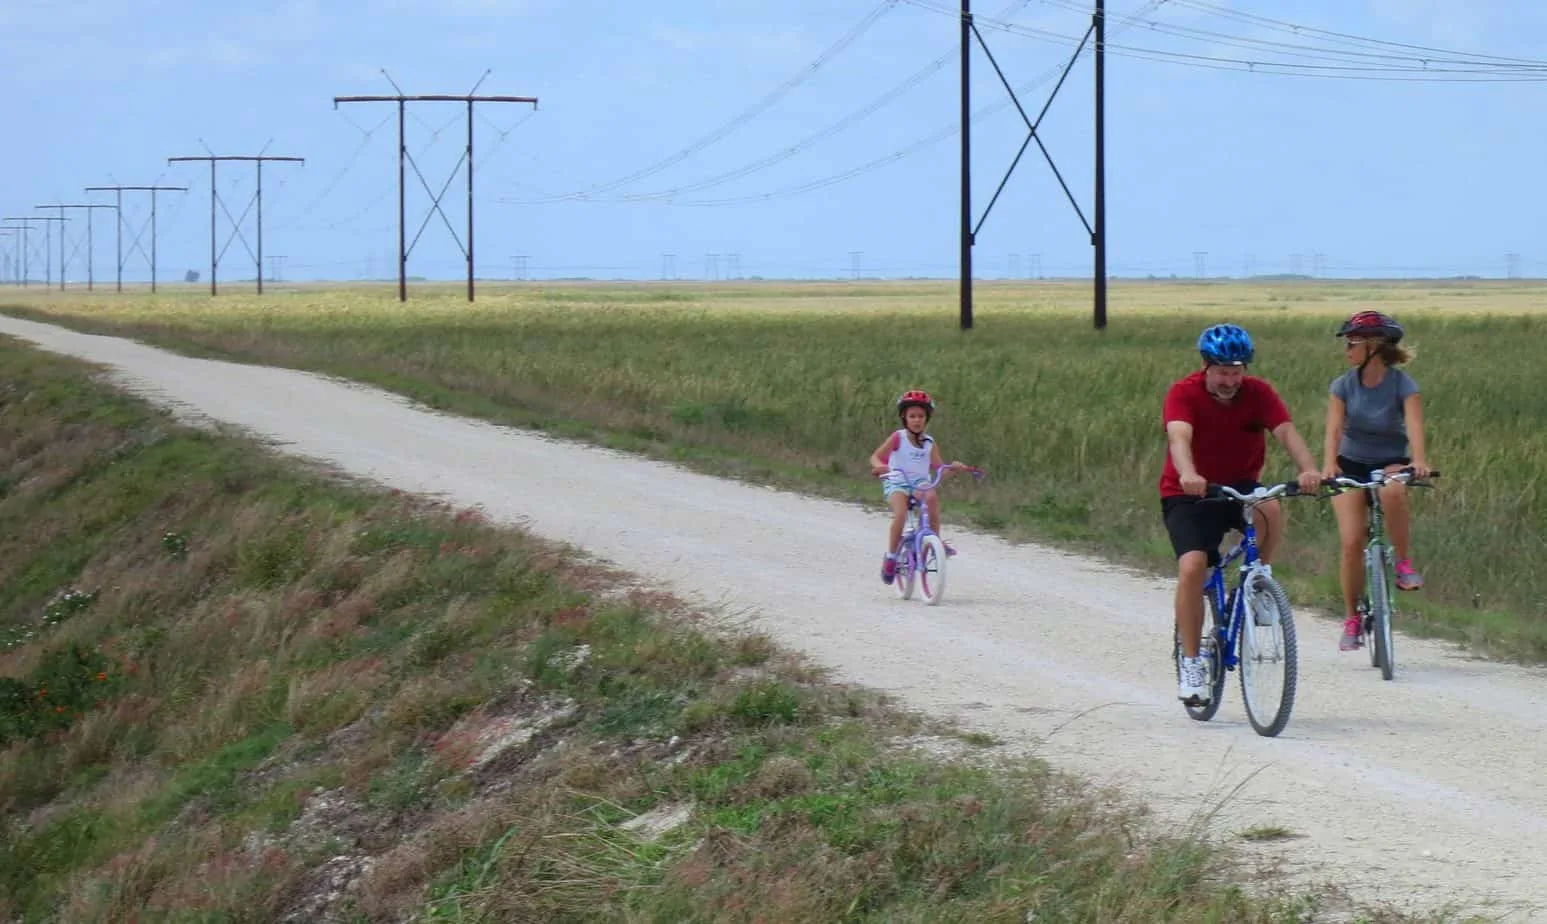 The Markham Park levee trail in Sunrise is a safe spot for family biking.